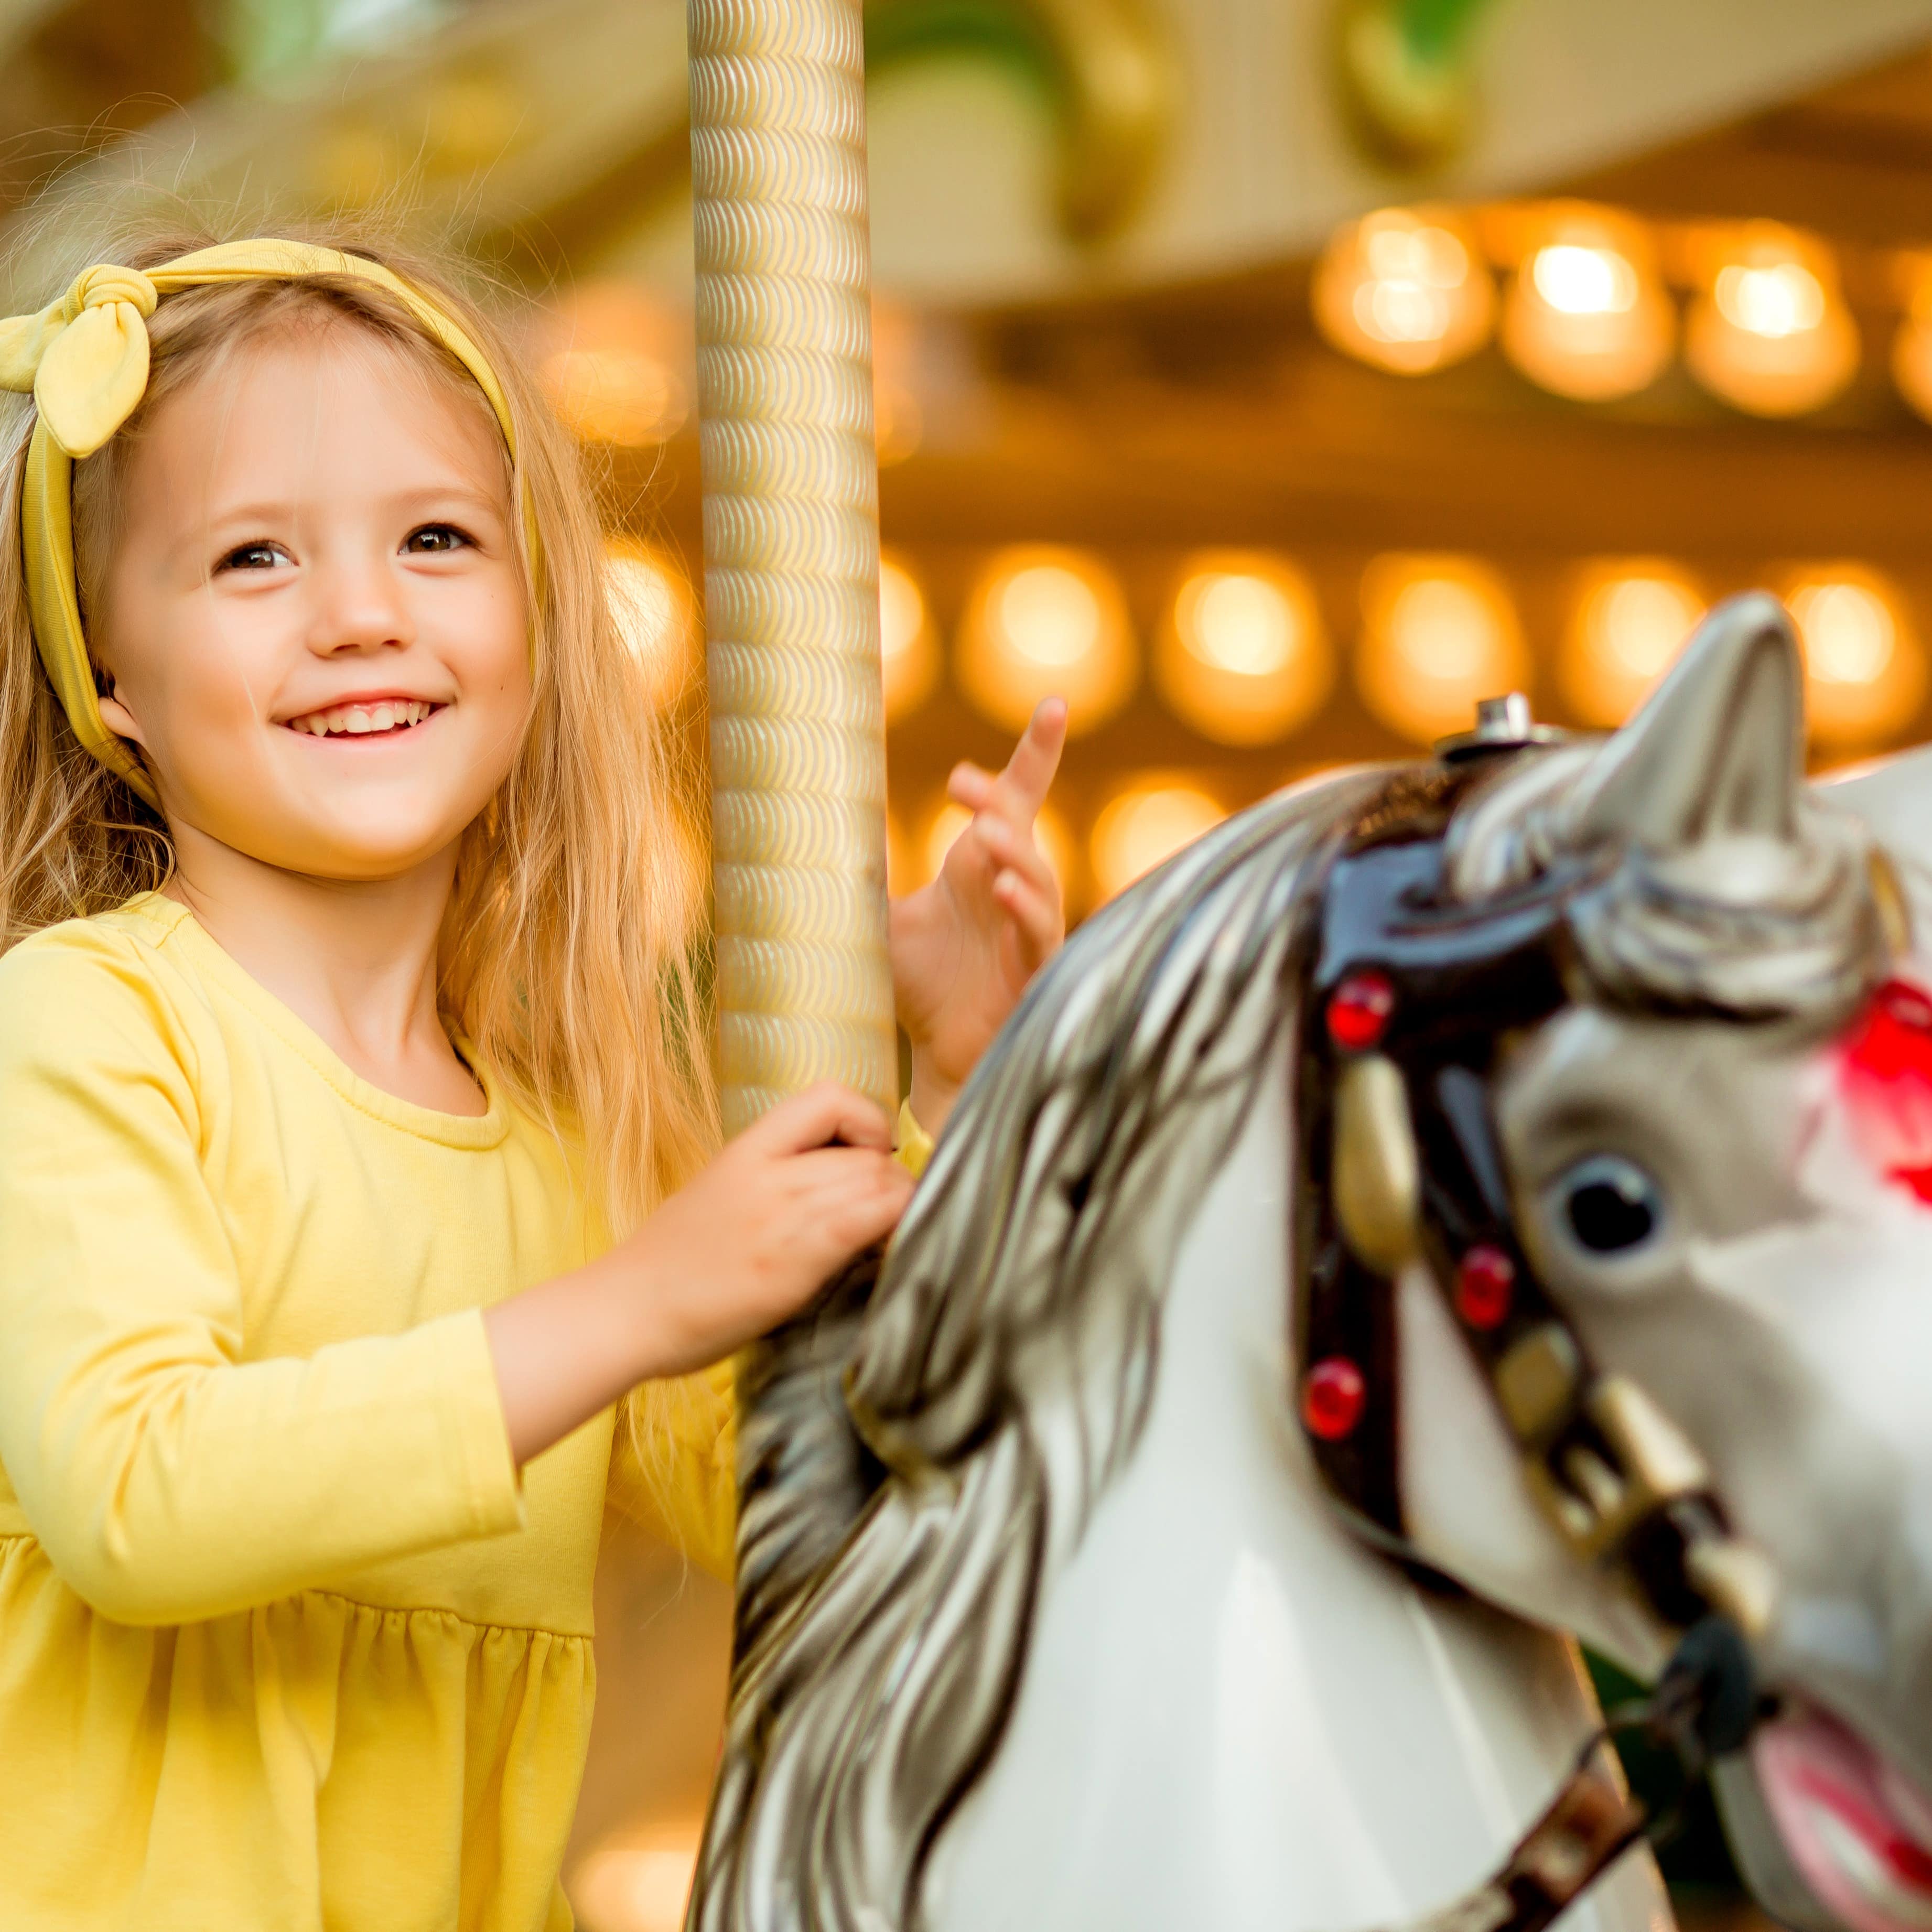 Little girl in yellow top riding on a carousel